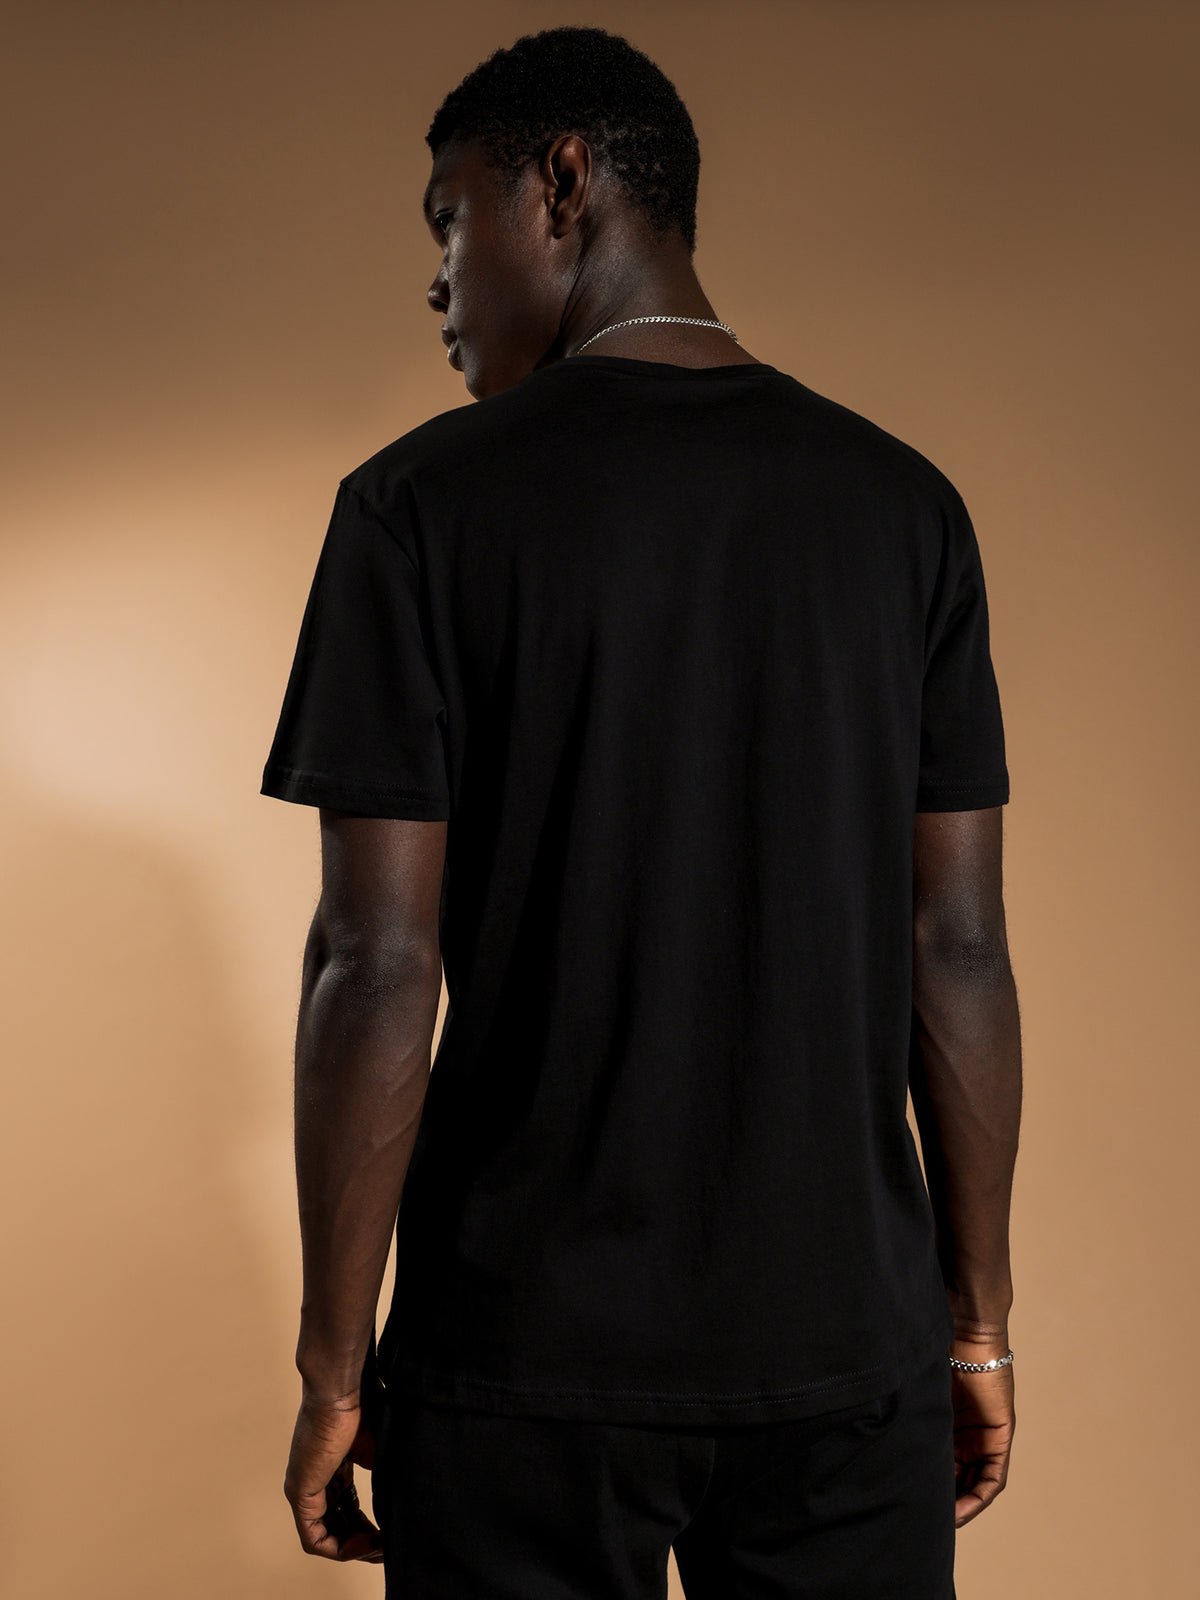 Authentic Ralo Slim-Fit T-Shirt in Black